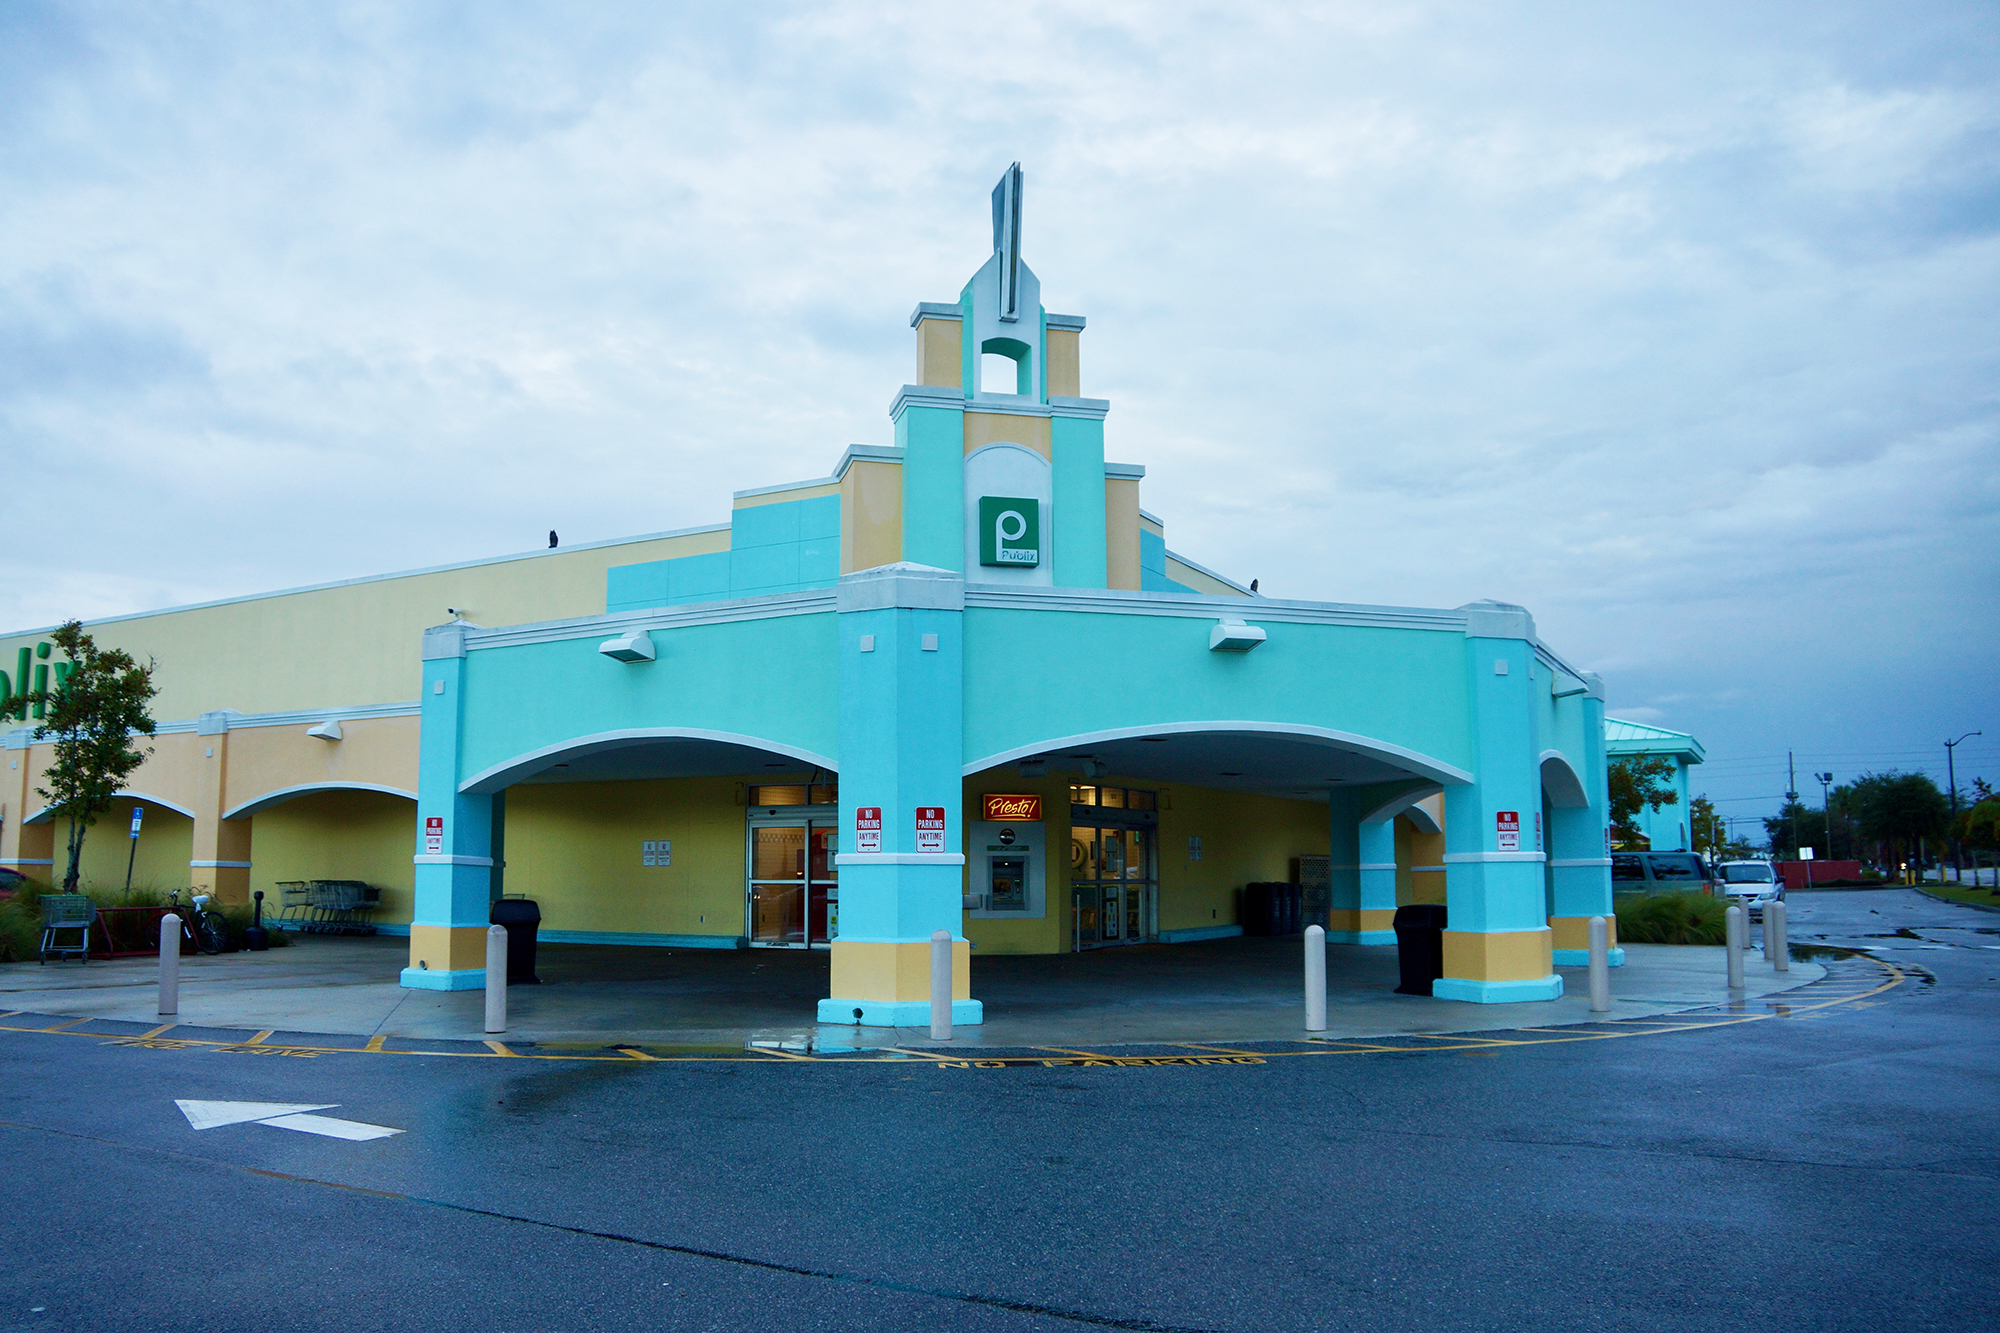 The Publix at Gateway Town Center will close, but Winn-Dixie will take over the store in the first quarter of 2020.